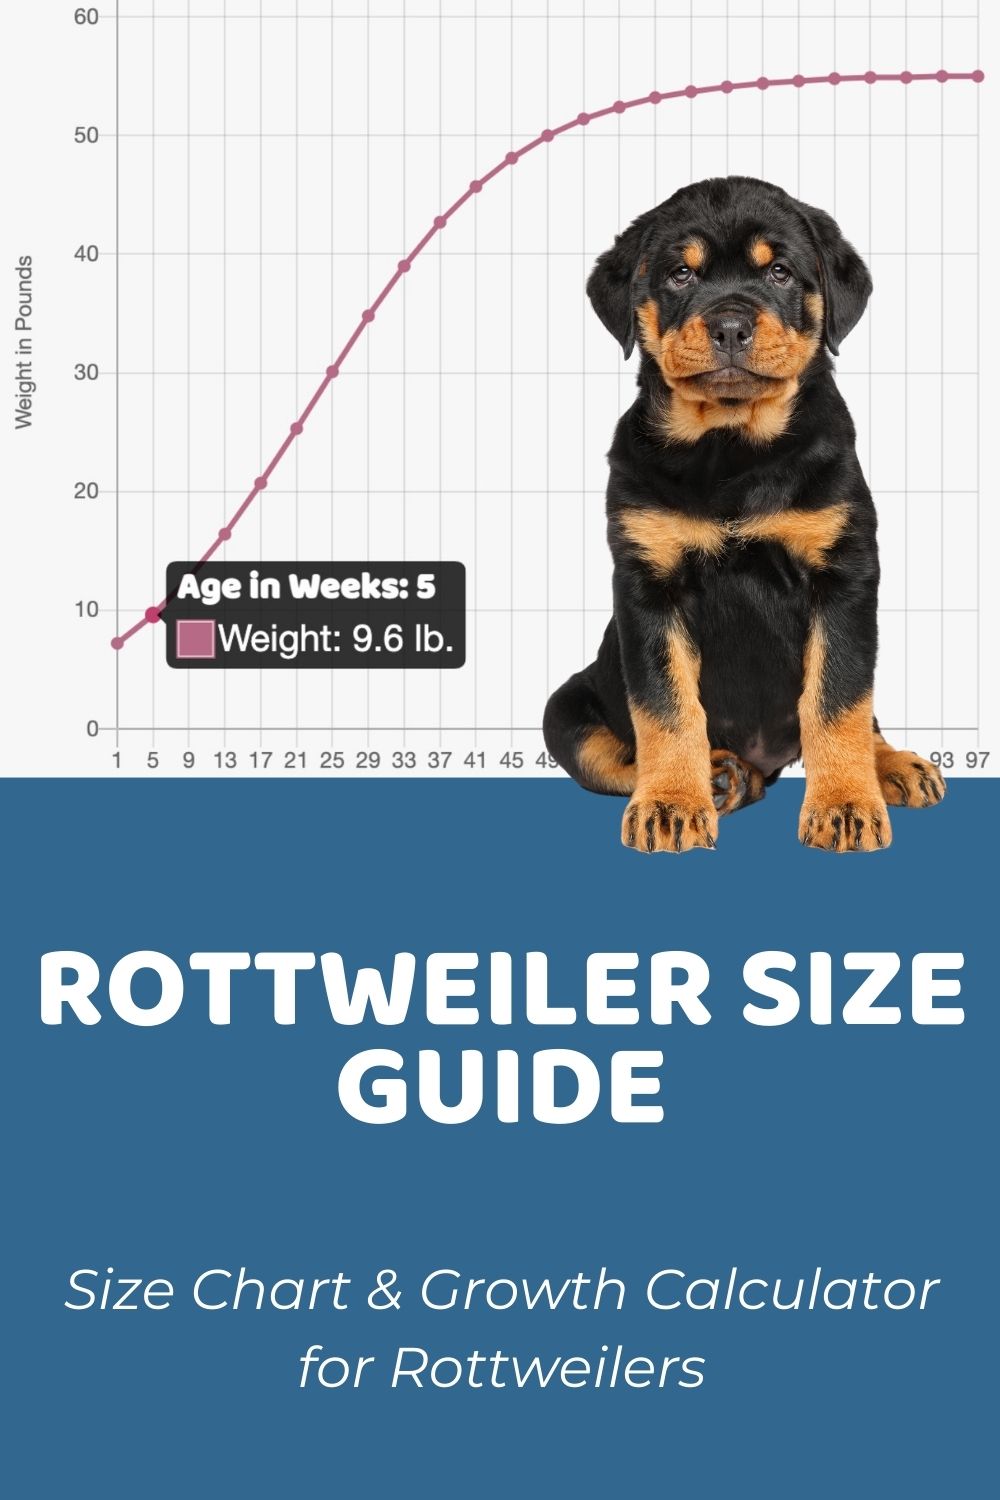 Rottweiler Size Guide: How Big Do Rottweilers Get? - Puppy Weight ...